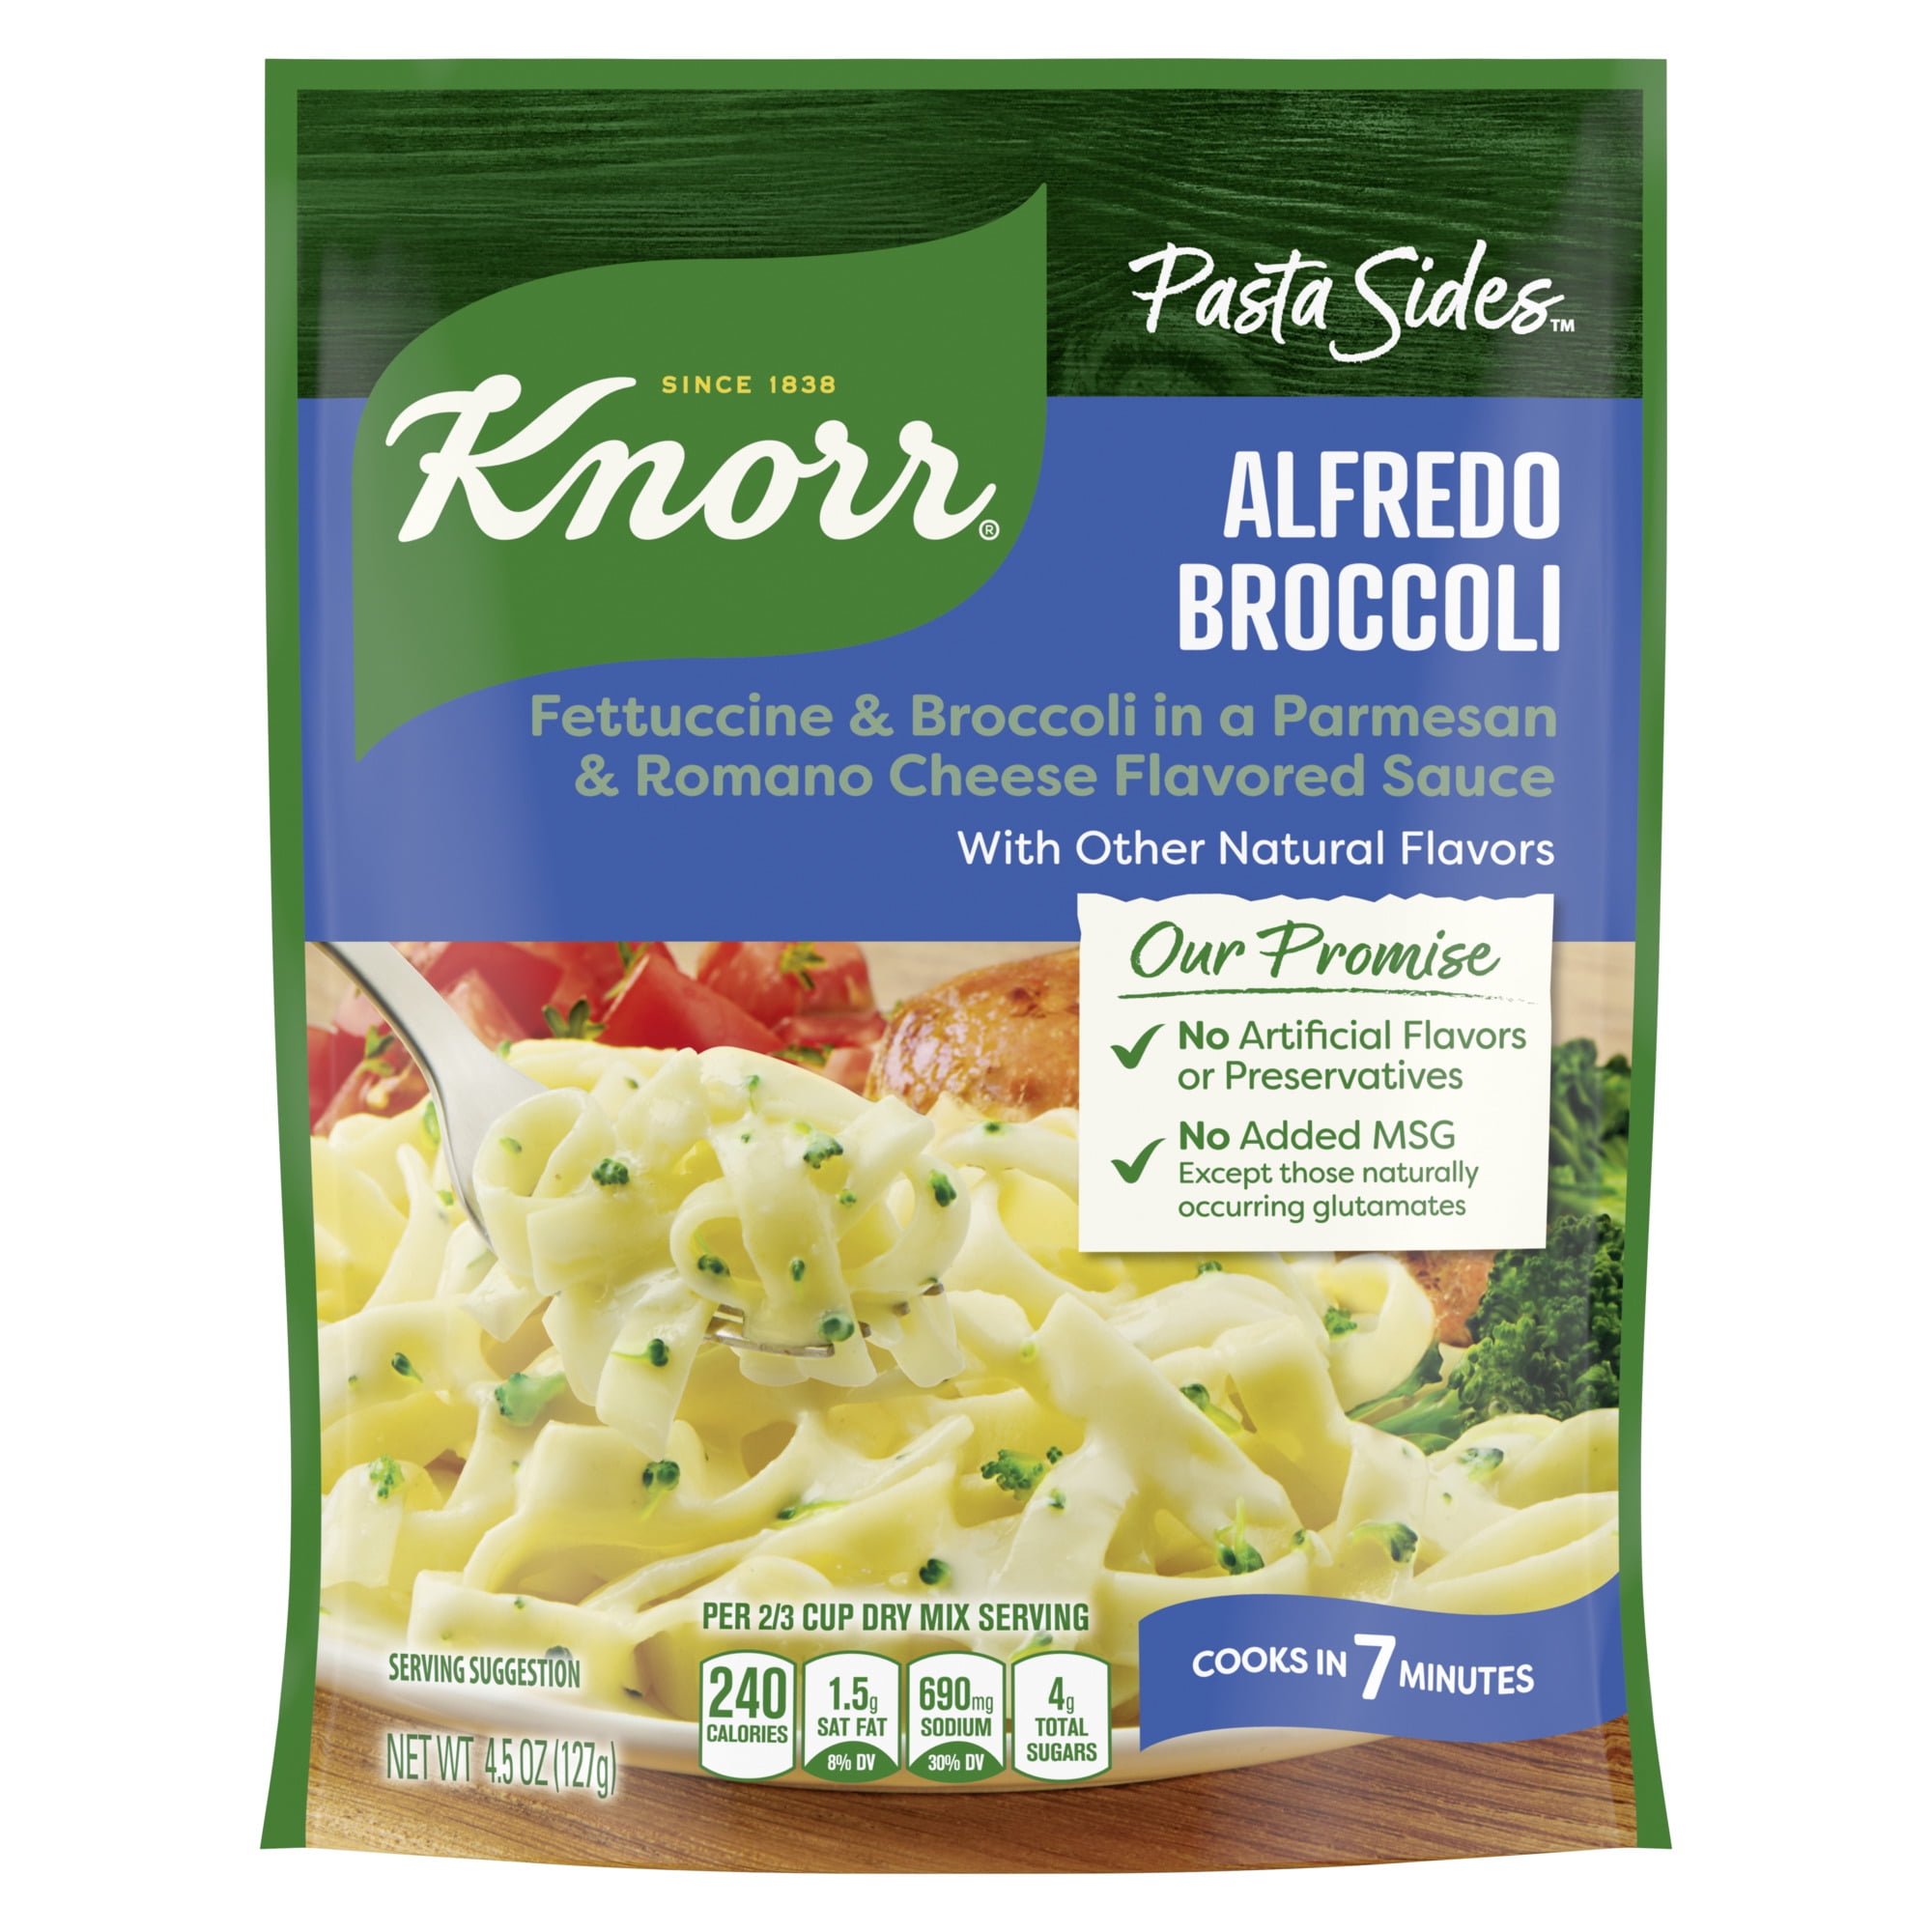 Knorr Pasta Sides Alfredo Broccoli Fettuccine, Cooks in 7 Minutes, No Artificial Flavors, No Preservatives, No Added MSG 4.5 oz